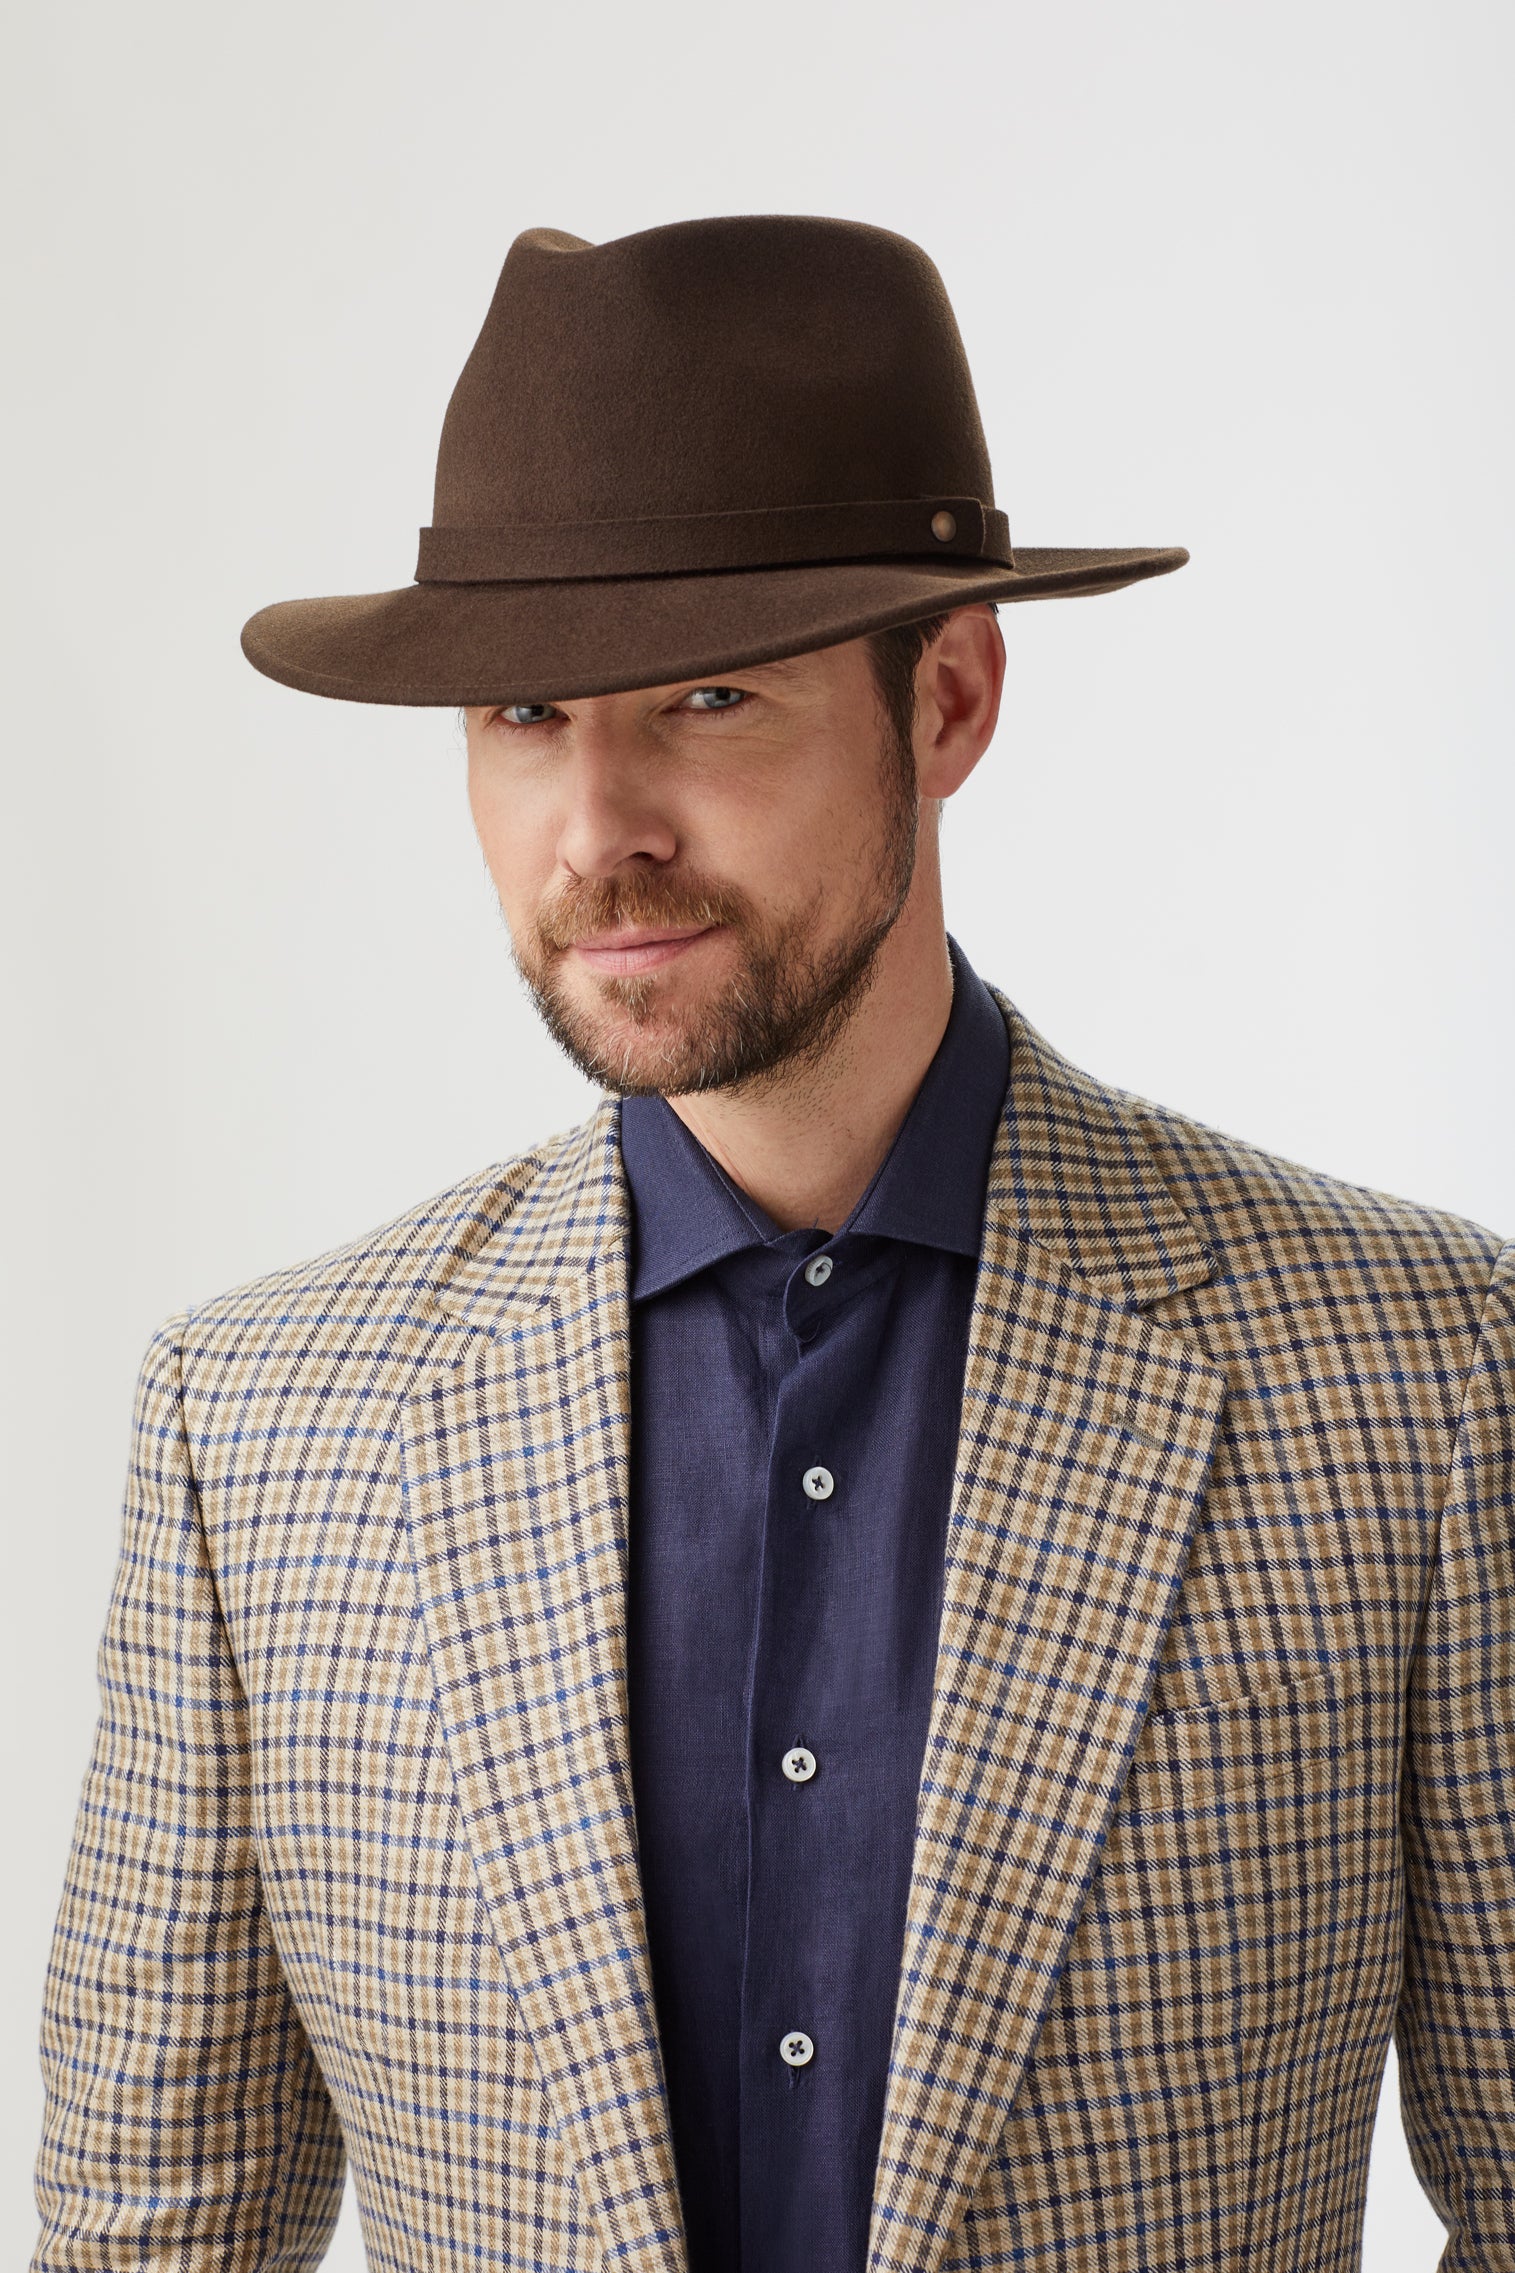 Nomad Rollable Trilby - Trilbies, Porkpie Hats & Cloches - Lock & Co. Hatters London UK